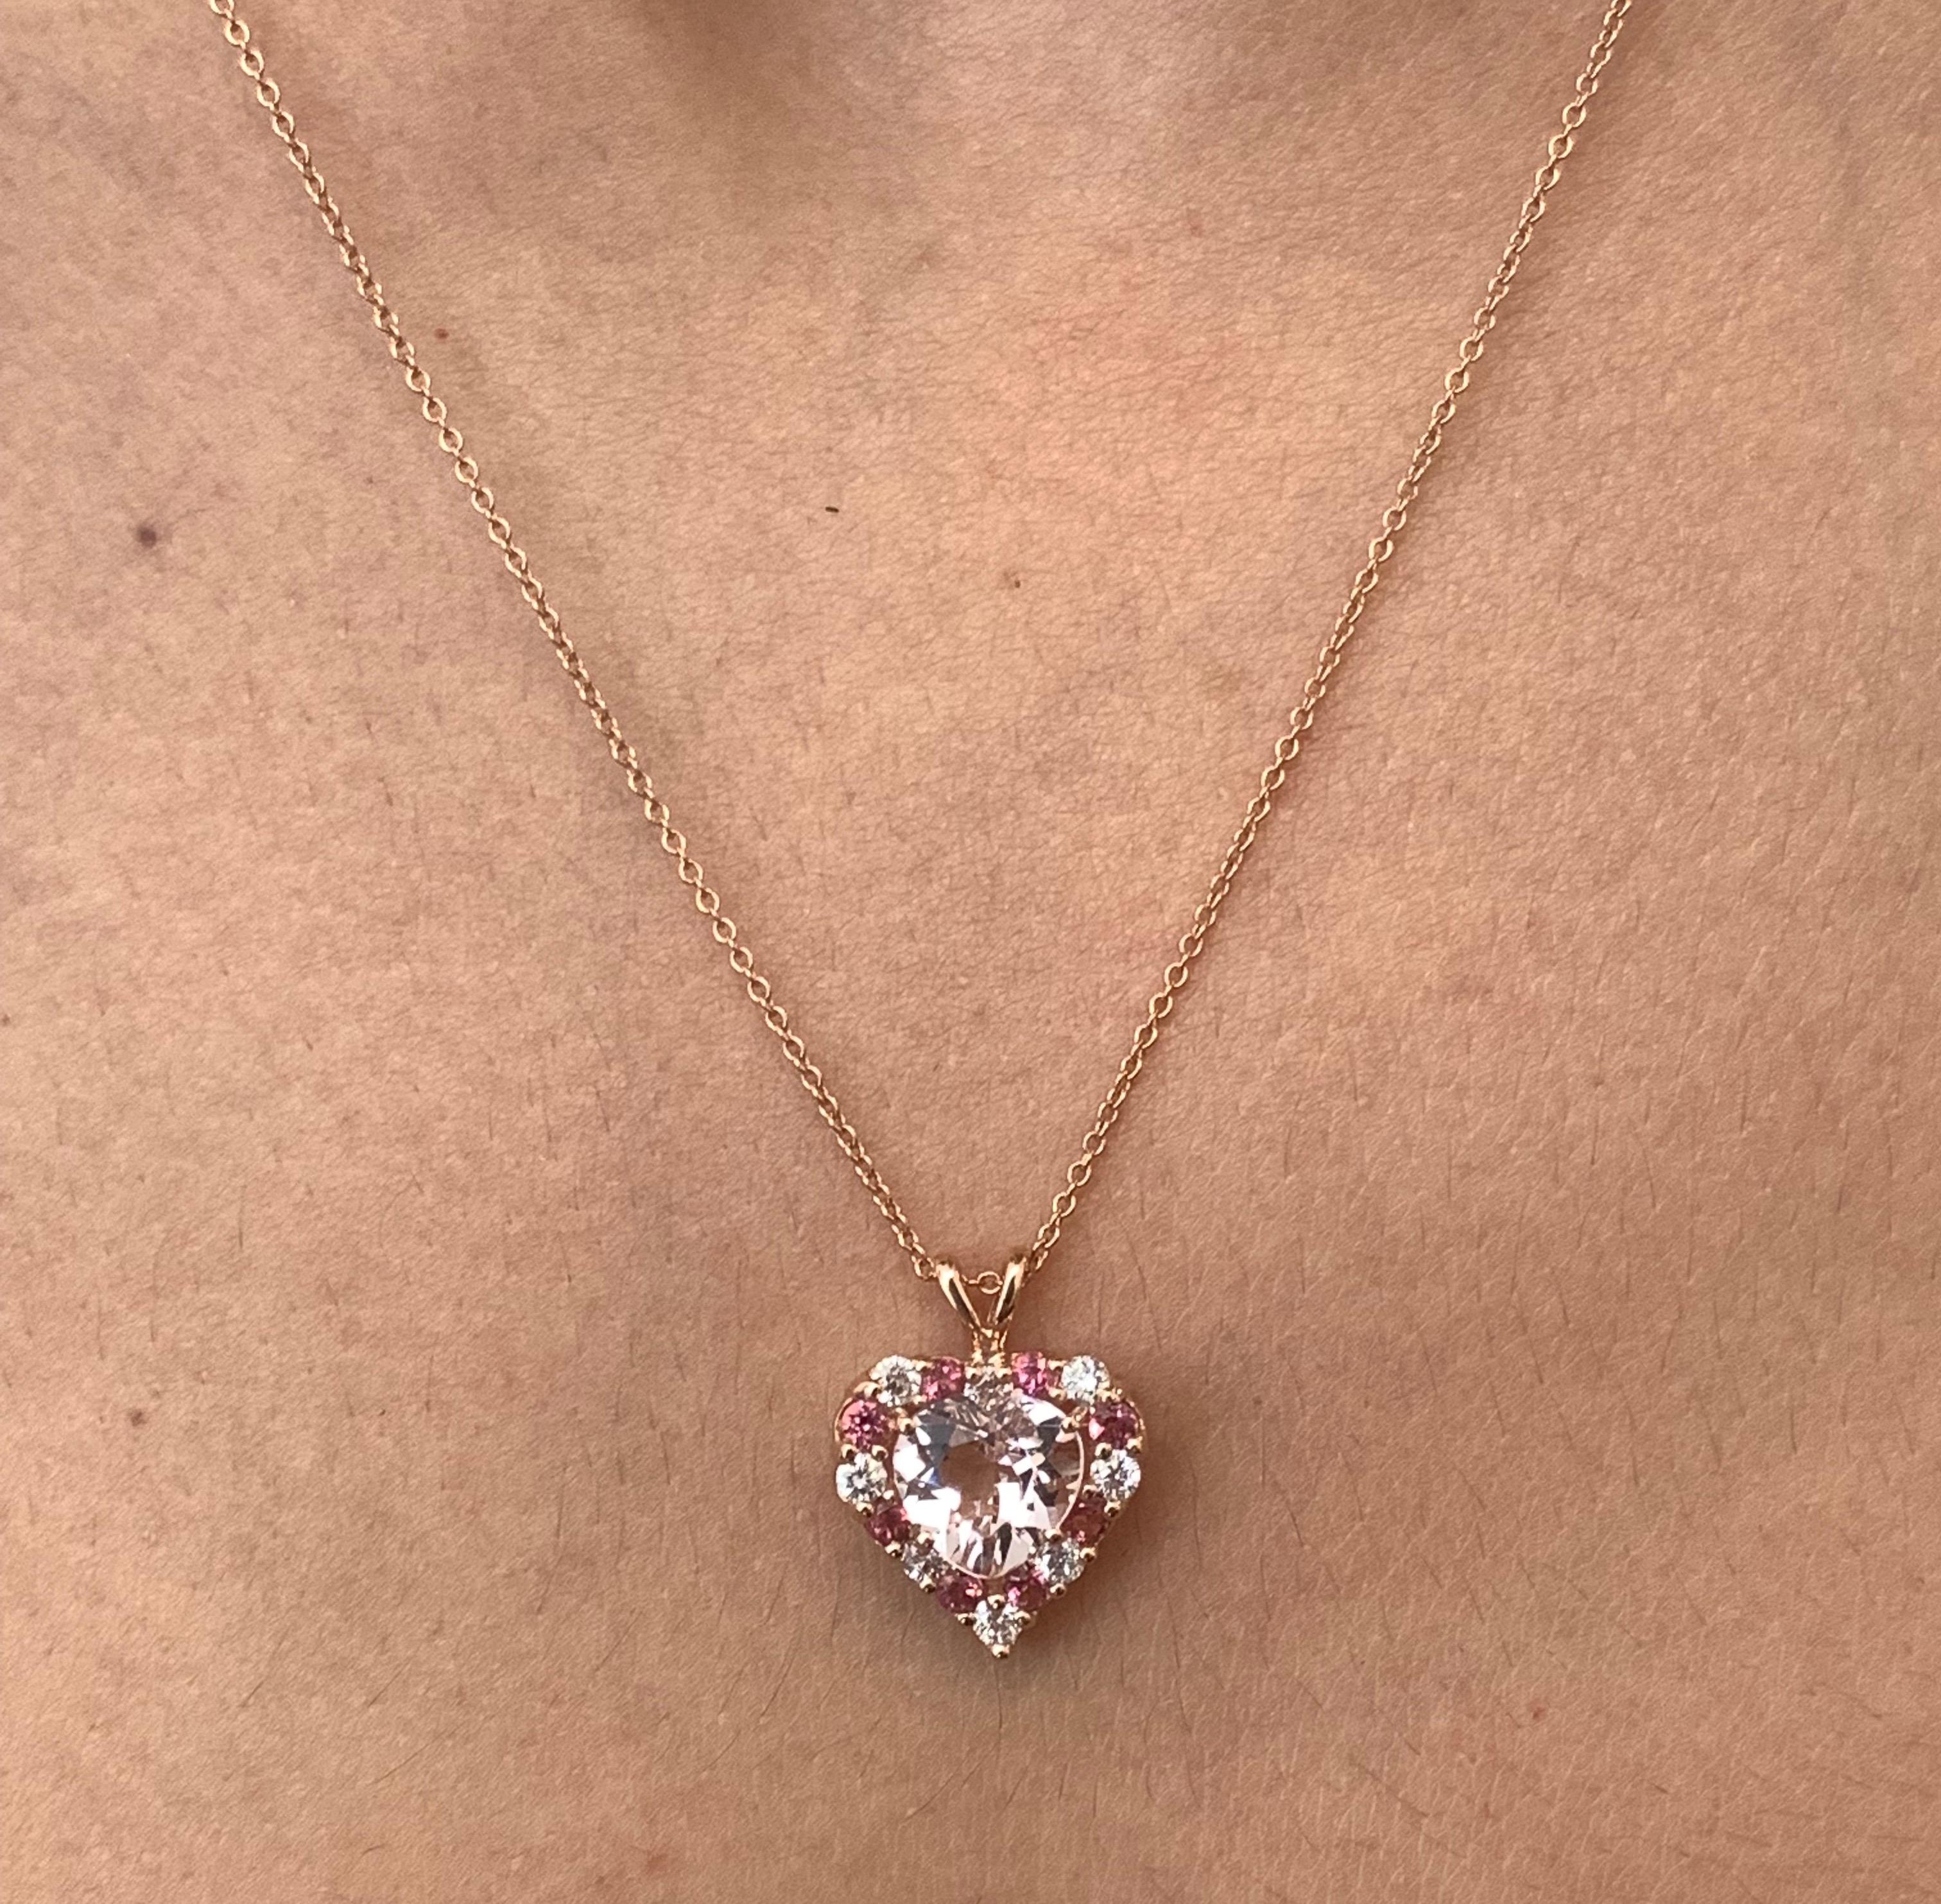 Material: 14k Rose Gold 
Center Stone Detail:  1 Heart Shaped Pink Morganite at 1.59 Carats
Stone Details: 8 Round Pink Tourmalines at 0.35 Carats Total
Diamond Details: 8 Brilliant Round White Diamonds at 0.32 Carats - Clarity: SI / Color: